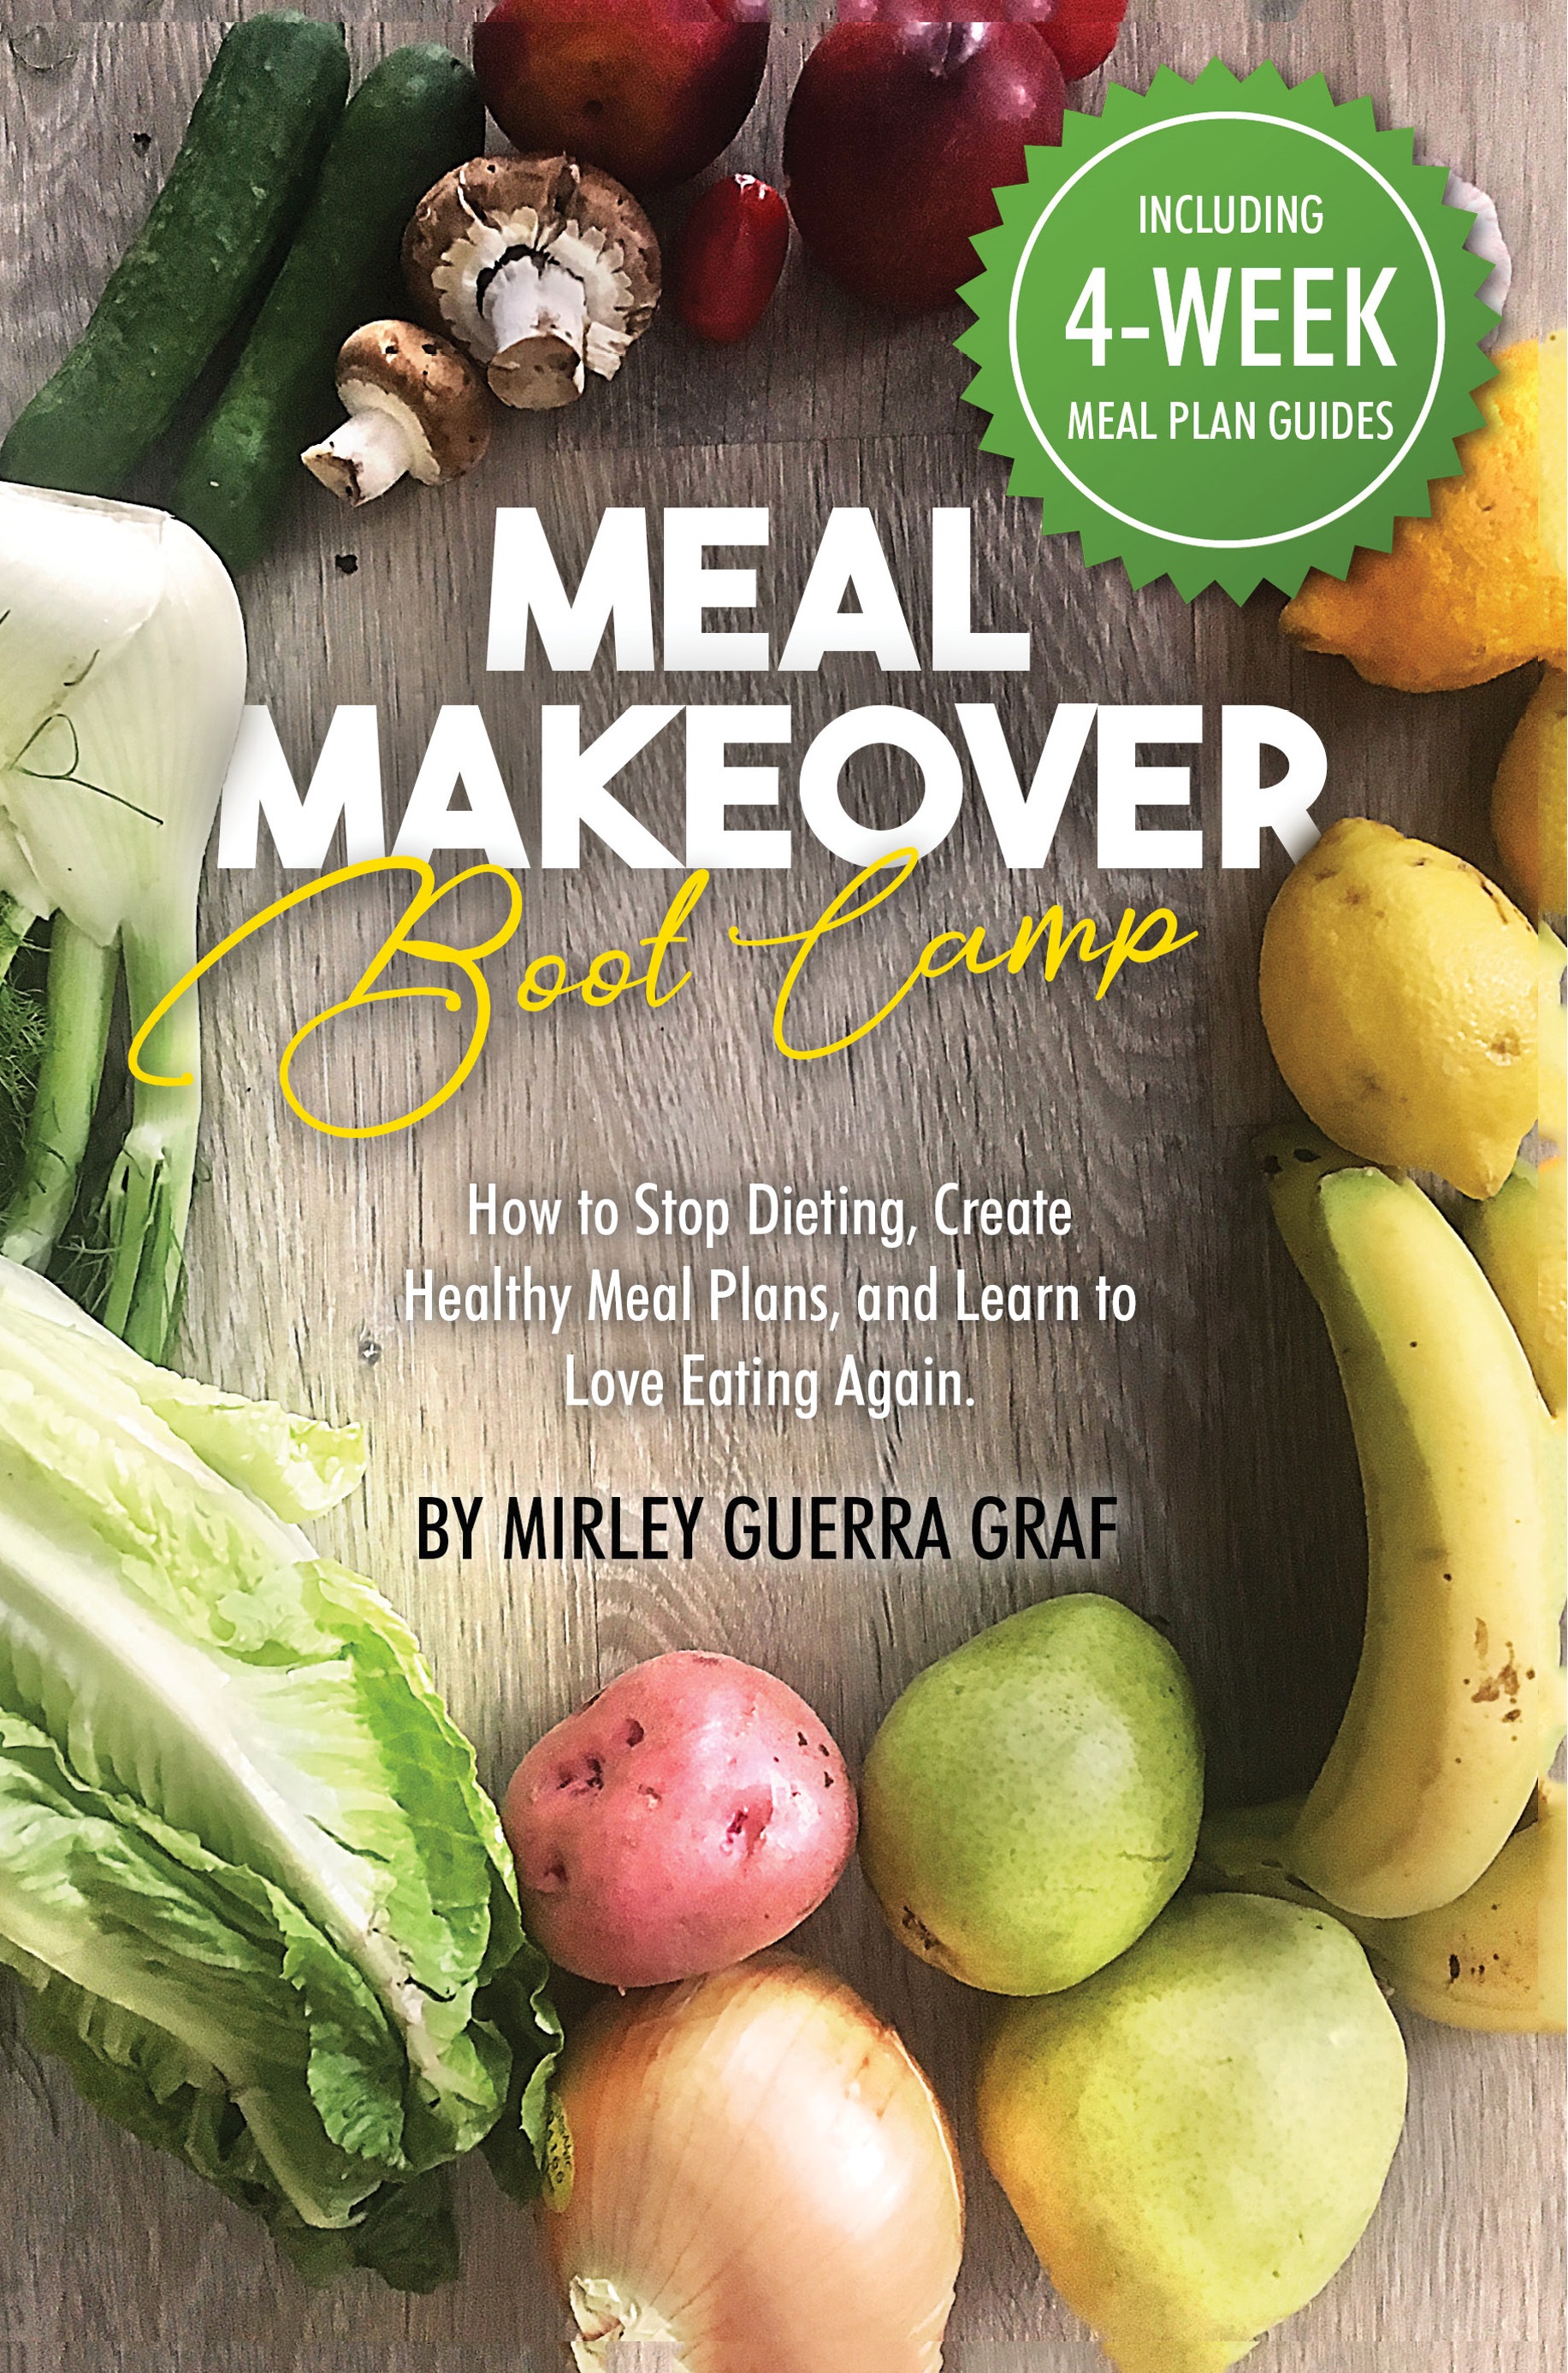 Meal Makeover Boot Camp: How to Stop Dieting, Create Healthy Meal Plans, and Learn to Love Eating Again by Mirley Guerra Graf